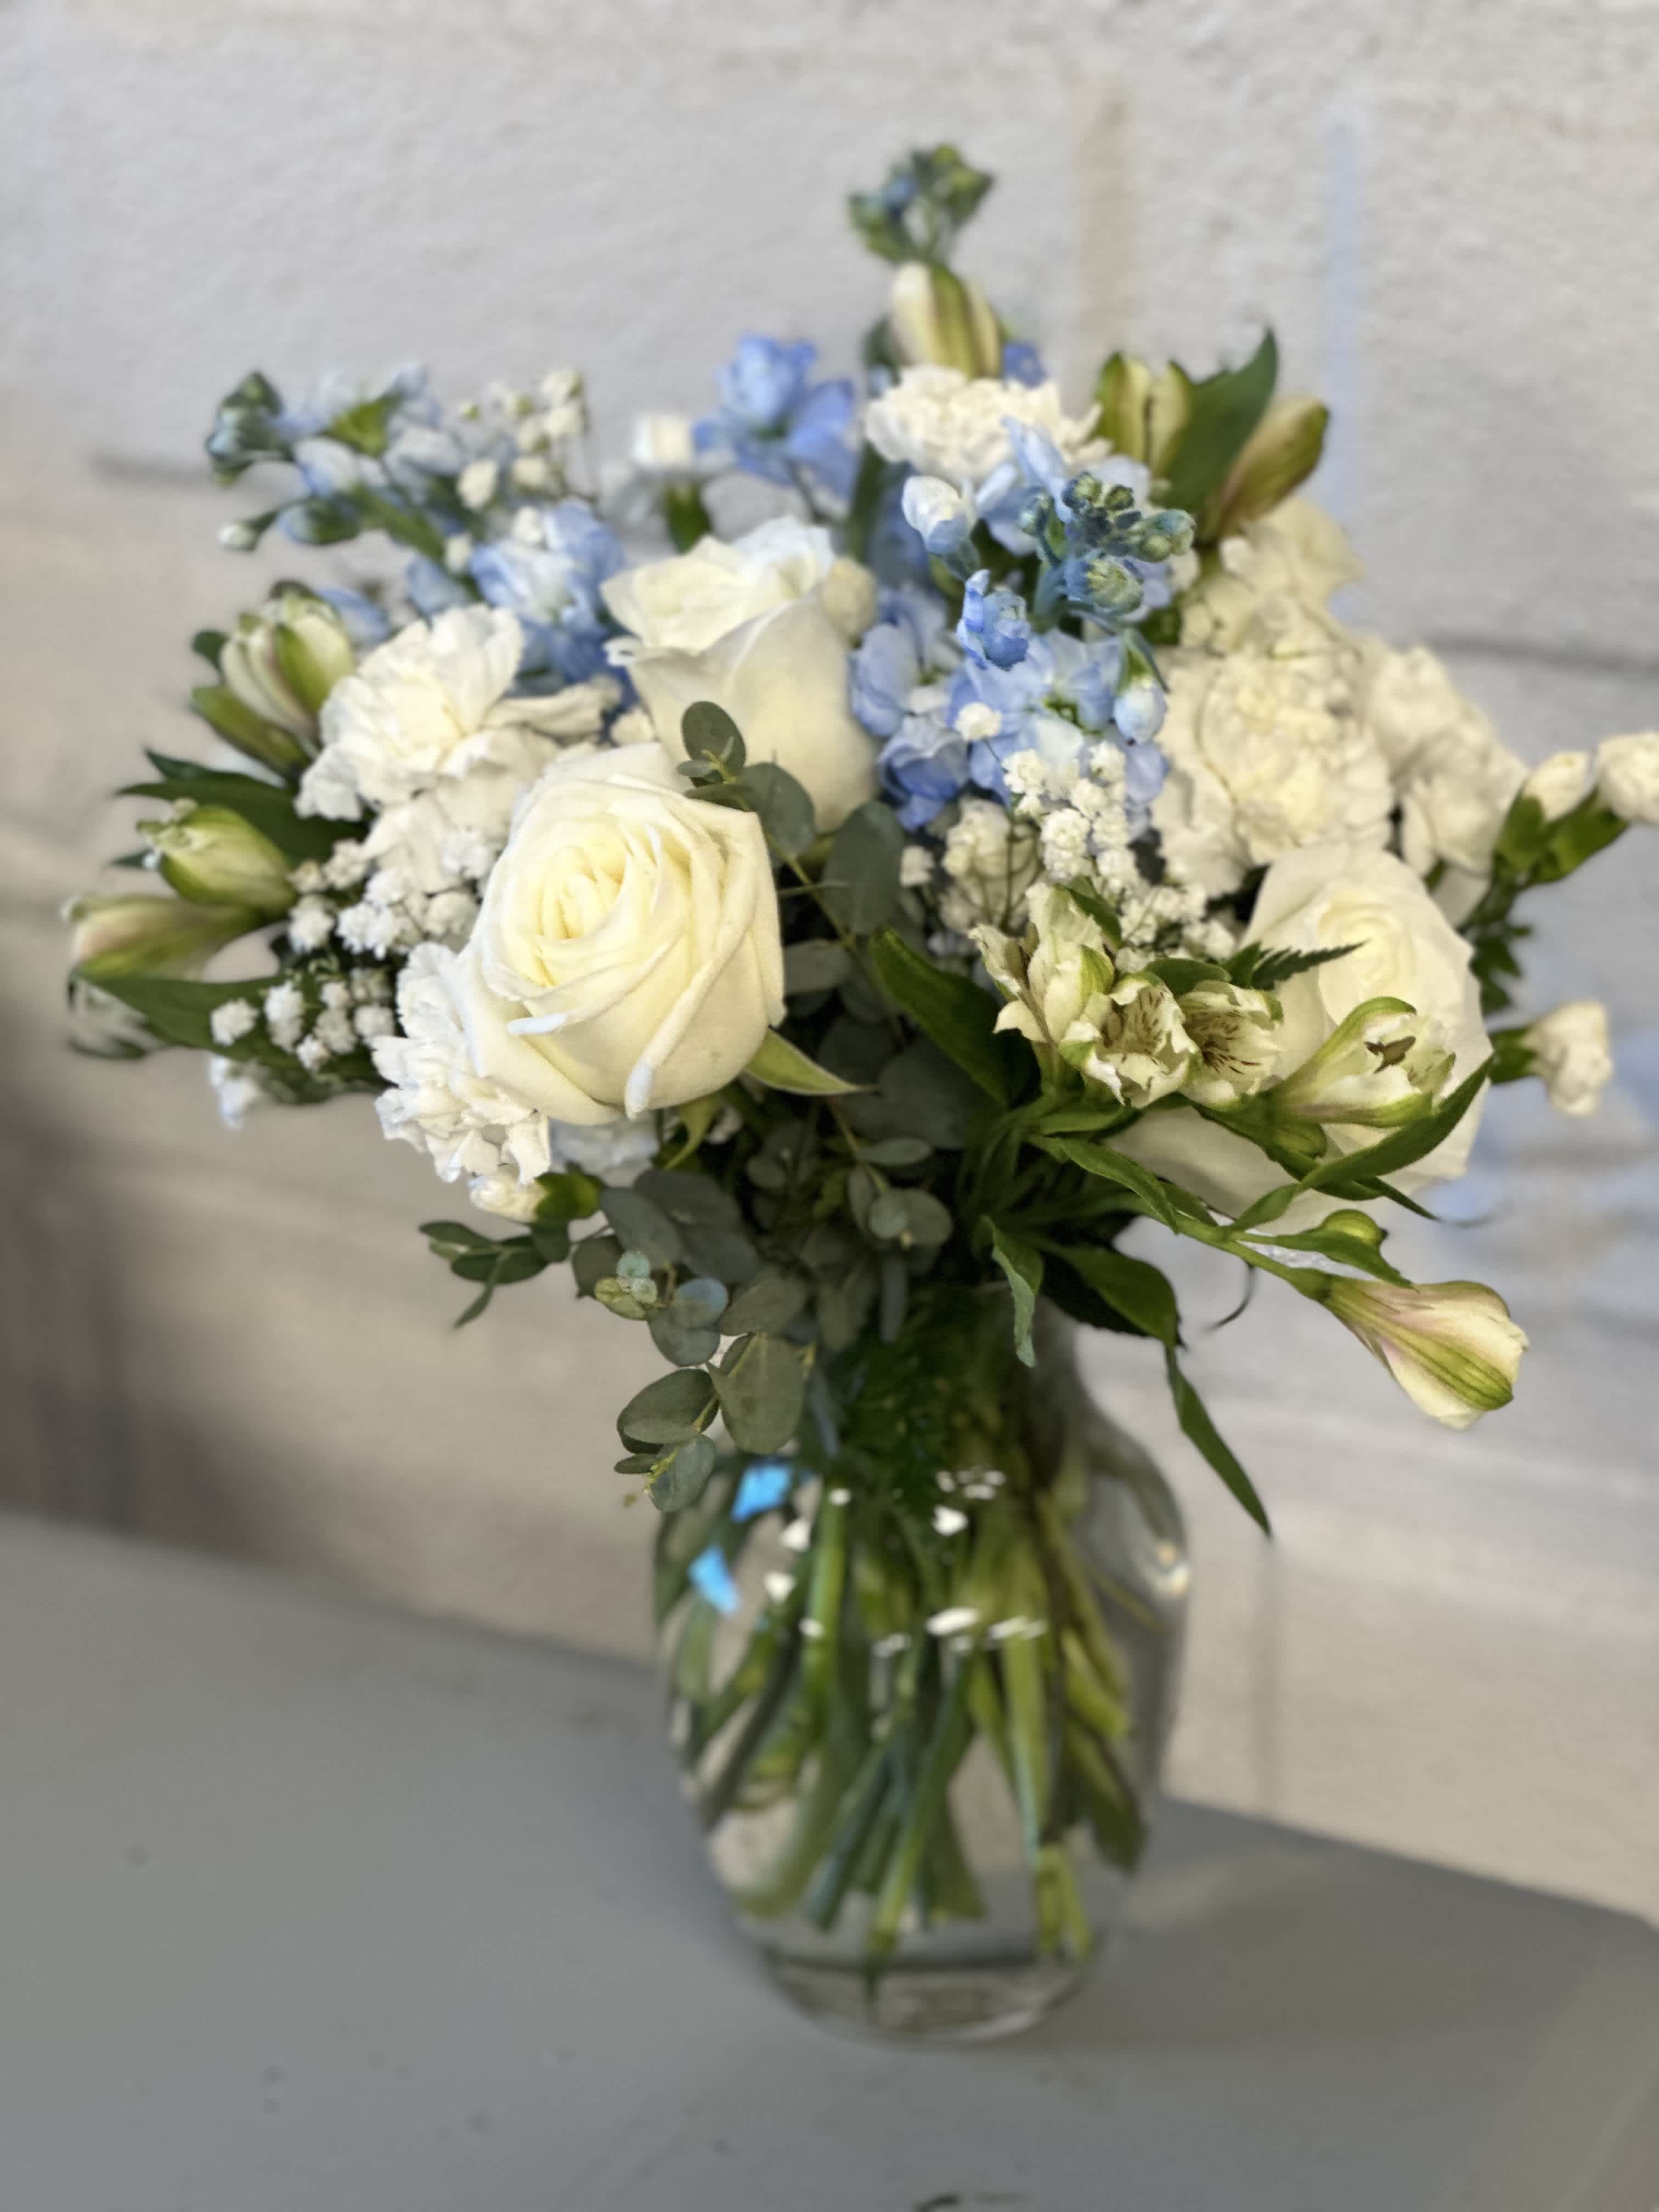 Gentle Reflections - This vase arrangement is adorned with a harmonious blend of delicate roses, vibrant carnations, and fragrant stock flowers, accented with subtle powder blue accents.